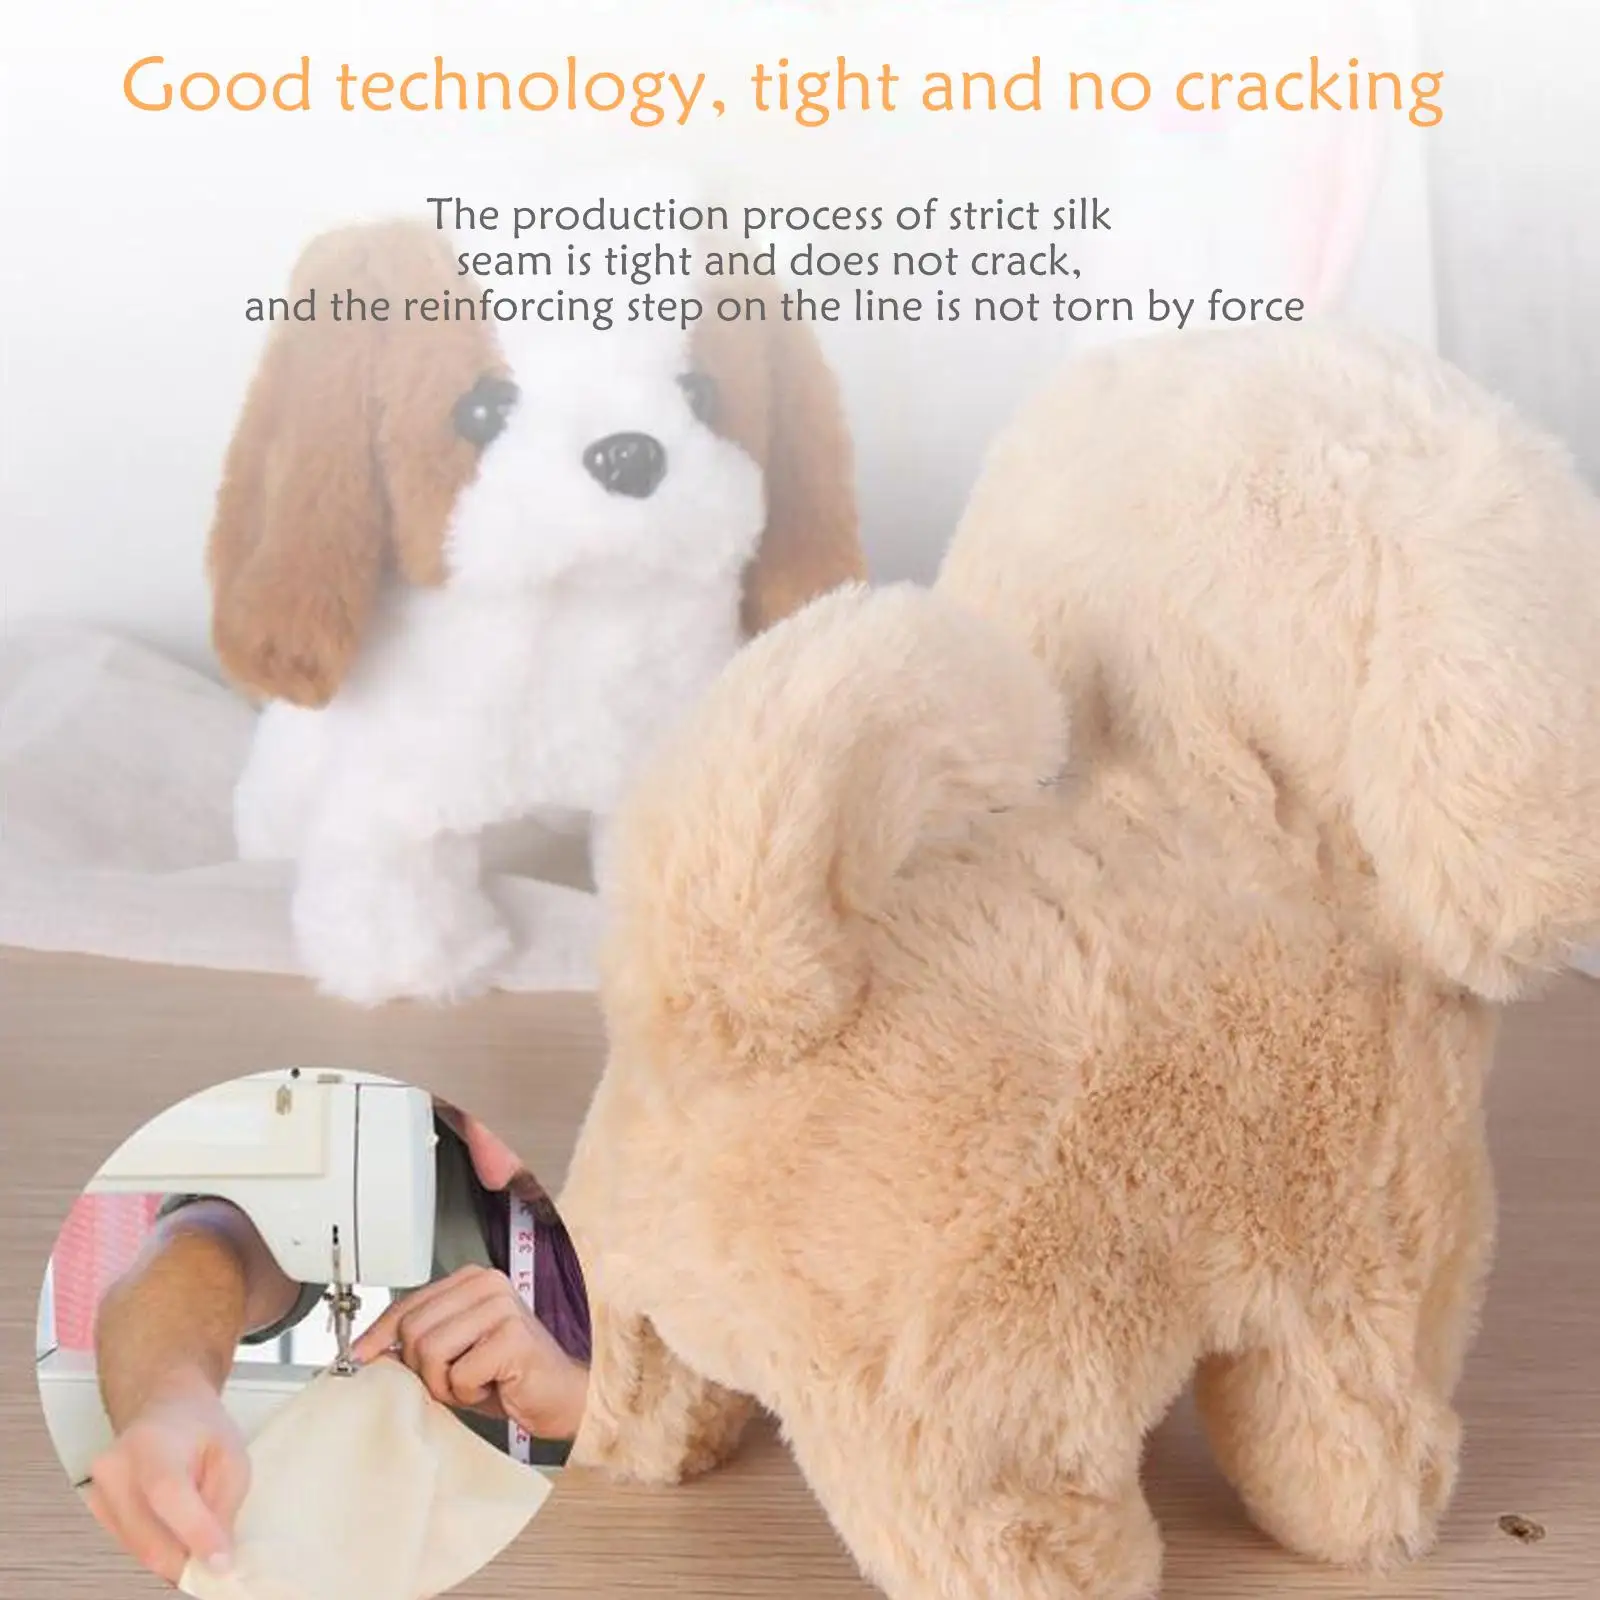 Electronic Pet Plush Dog Barking Tail Wagging Lifelike Funny Interactive Toy Animal for Children Toddlers Gift Stuffed Animals